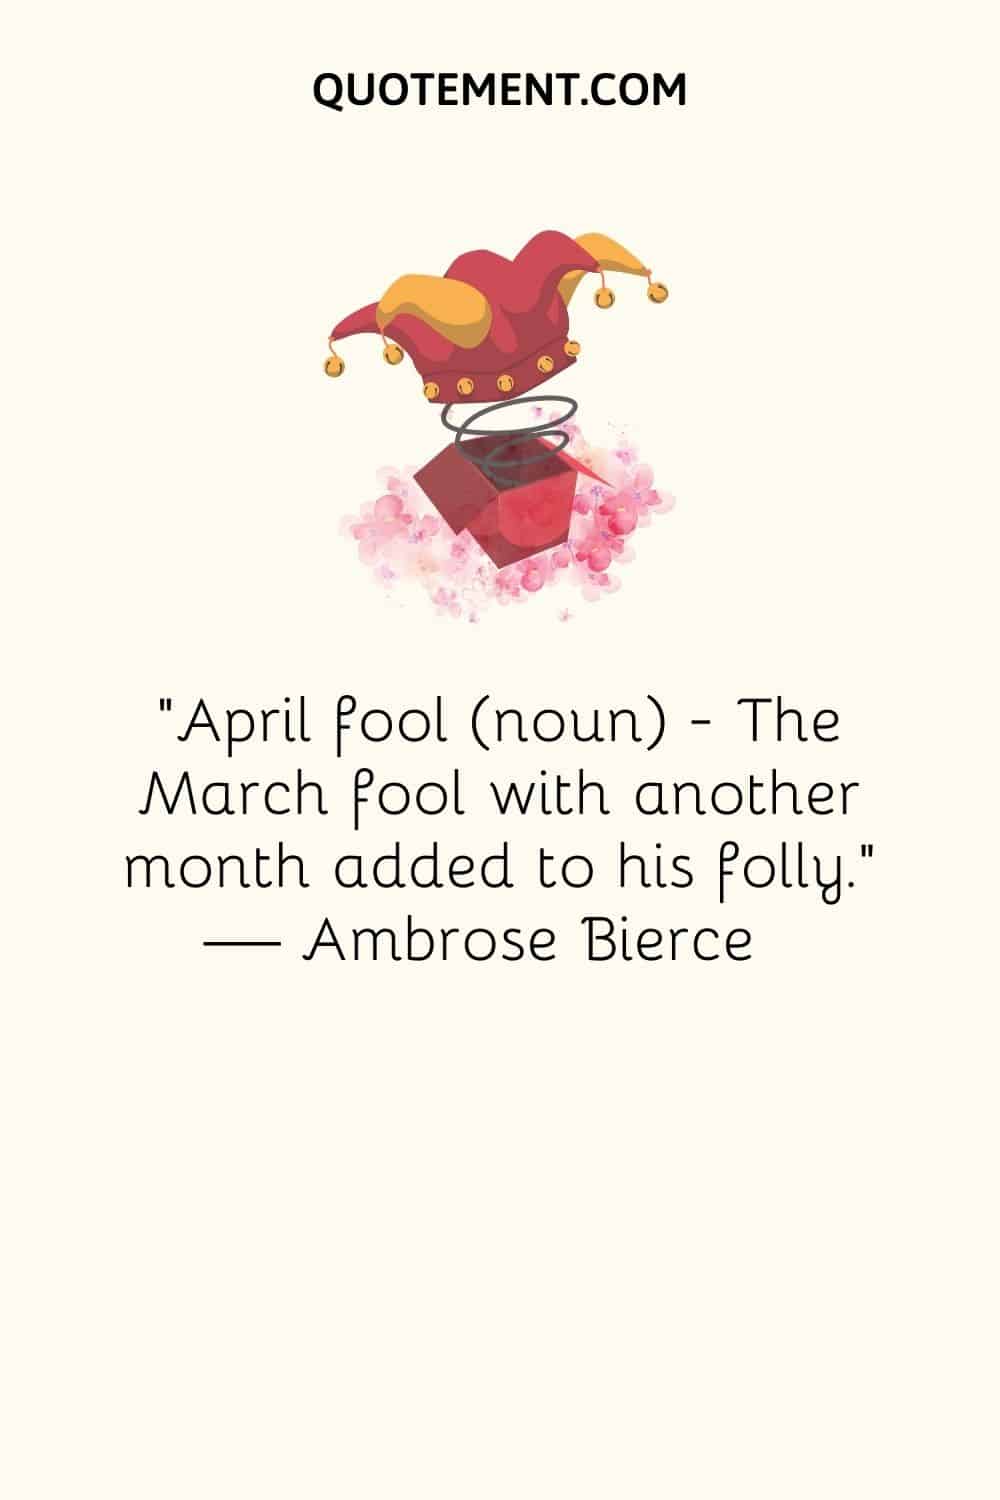 April fool (noun) — The March fool with another month added to his folly